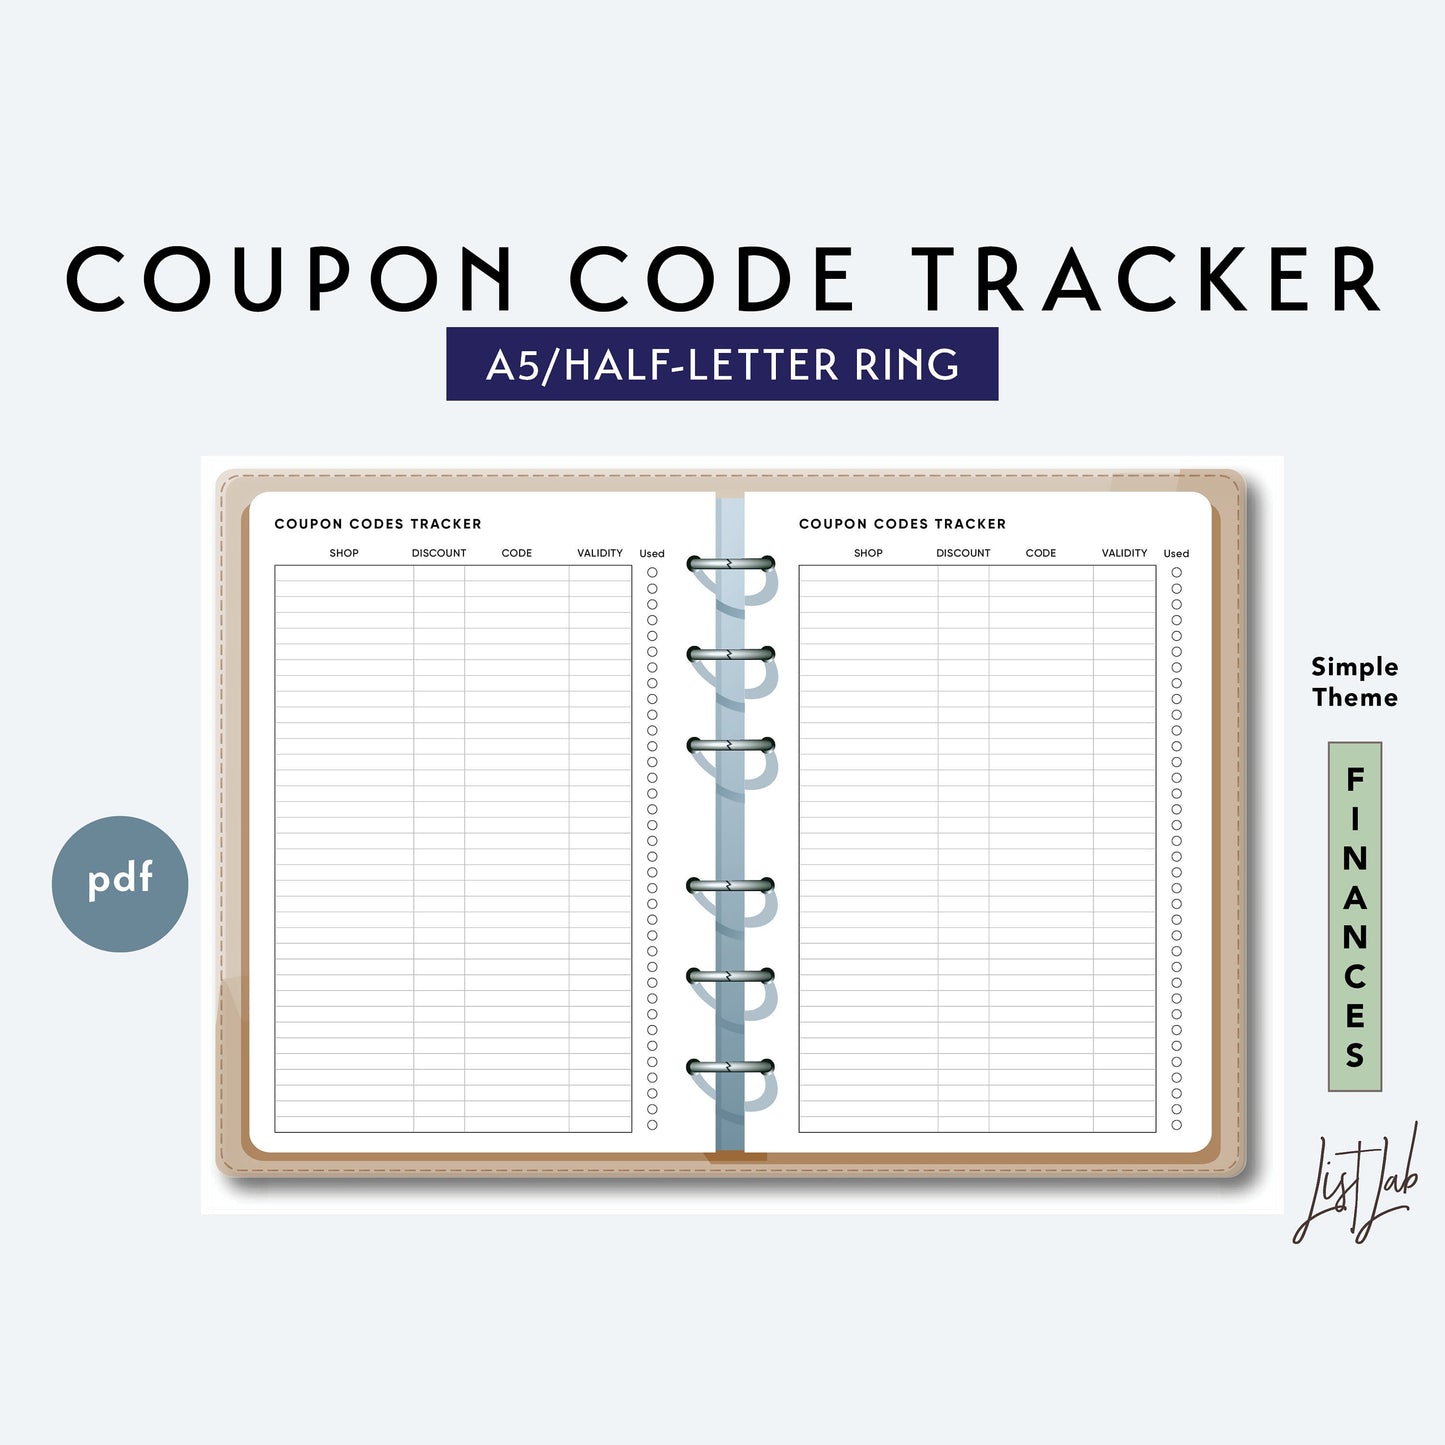 A5 / Half-Letter Ring COUPON CODE TRACKER Printable Set